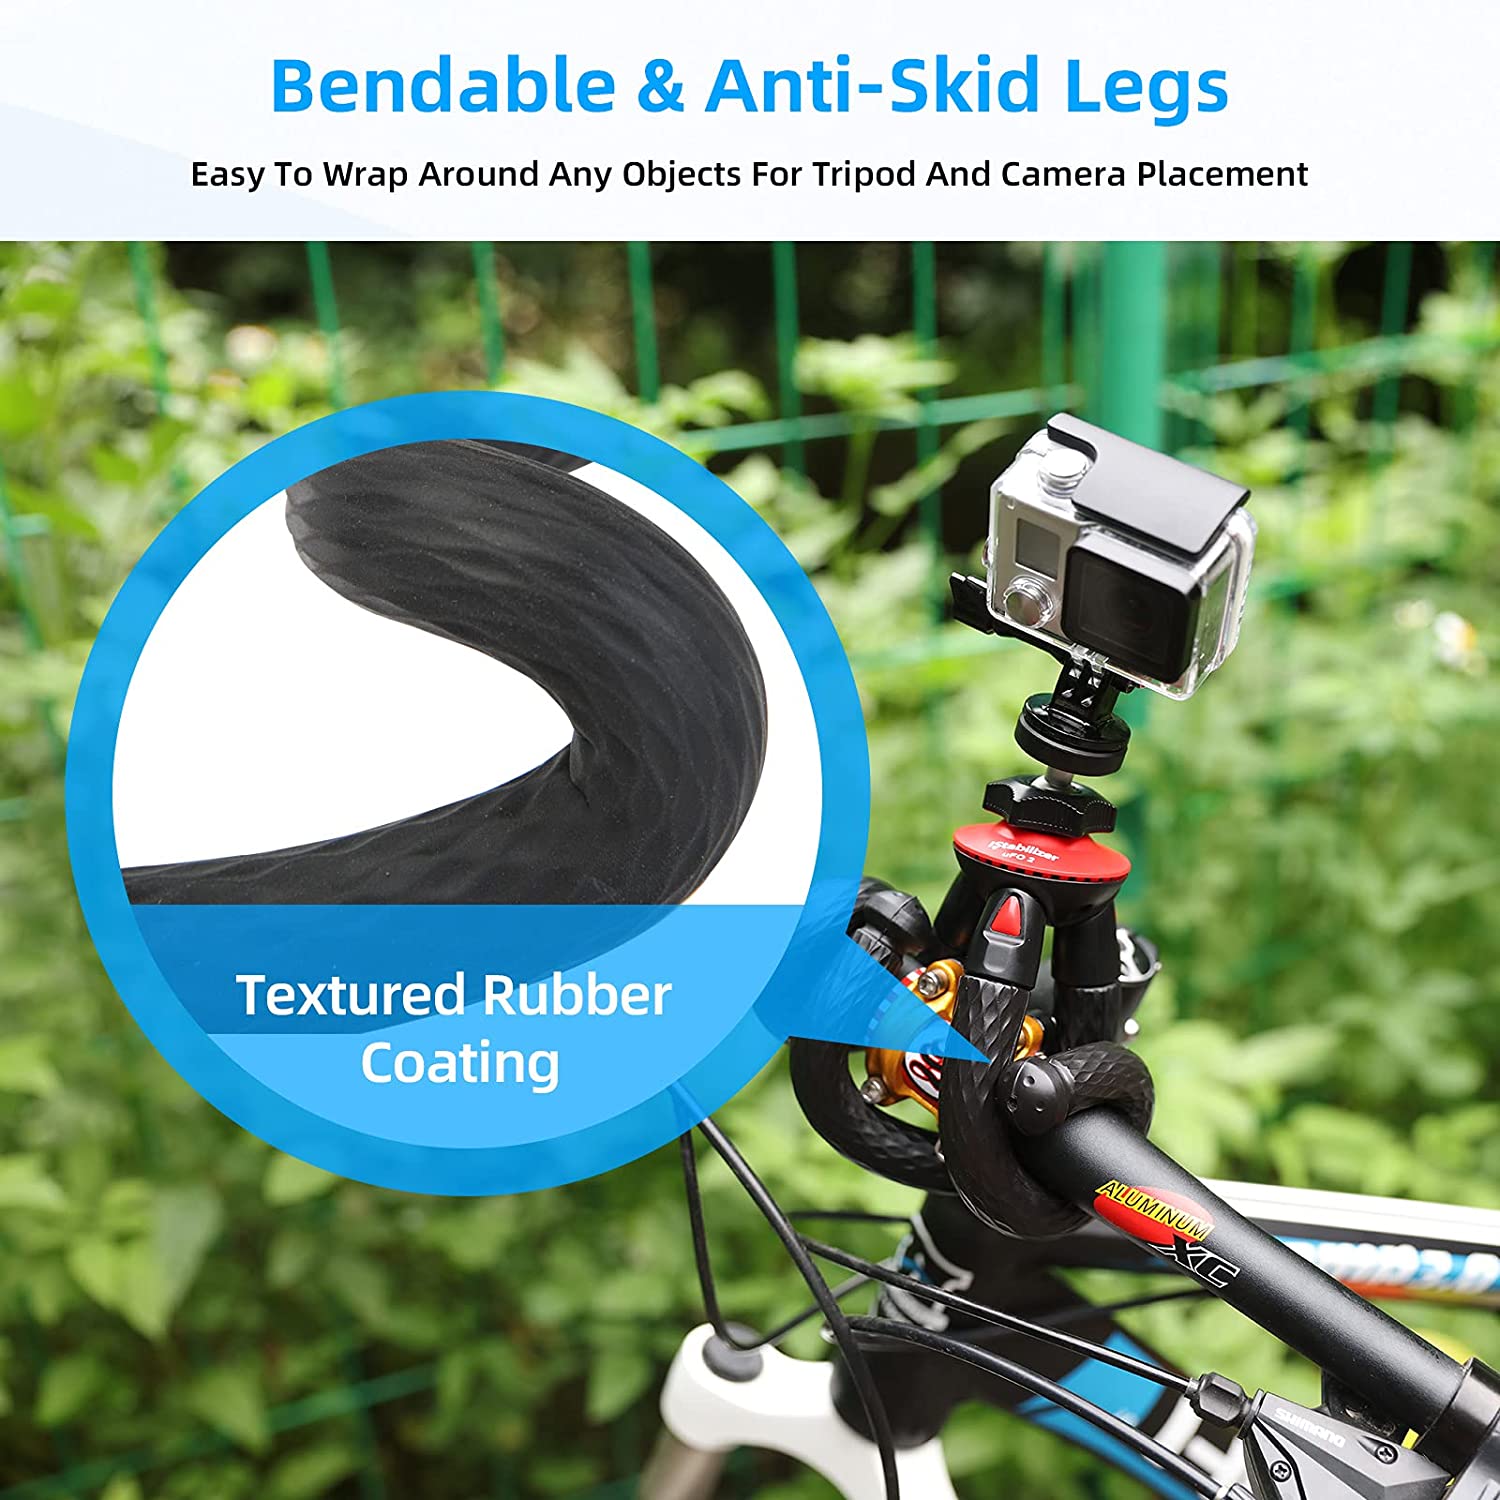 The holder has good extensibility and can be fixed on the front of a bicycle.